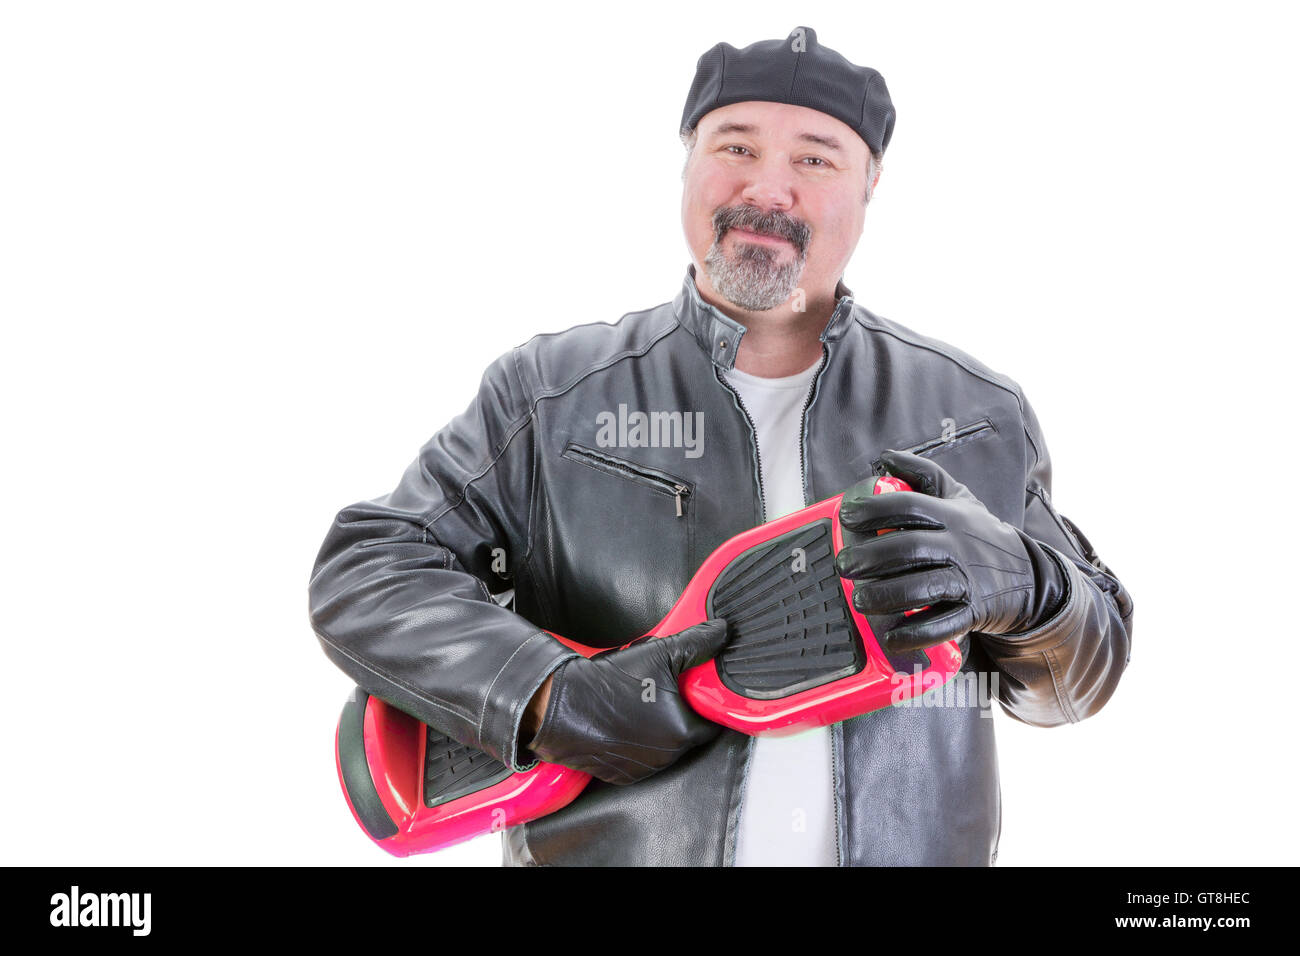 Content middle aged handsome man in hat and leather jacket stands holding a red and black hoverboard in hands with leather glove Stock Photo